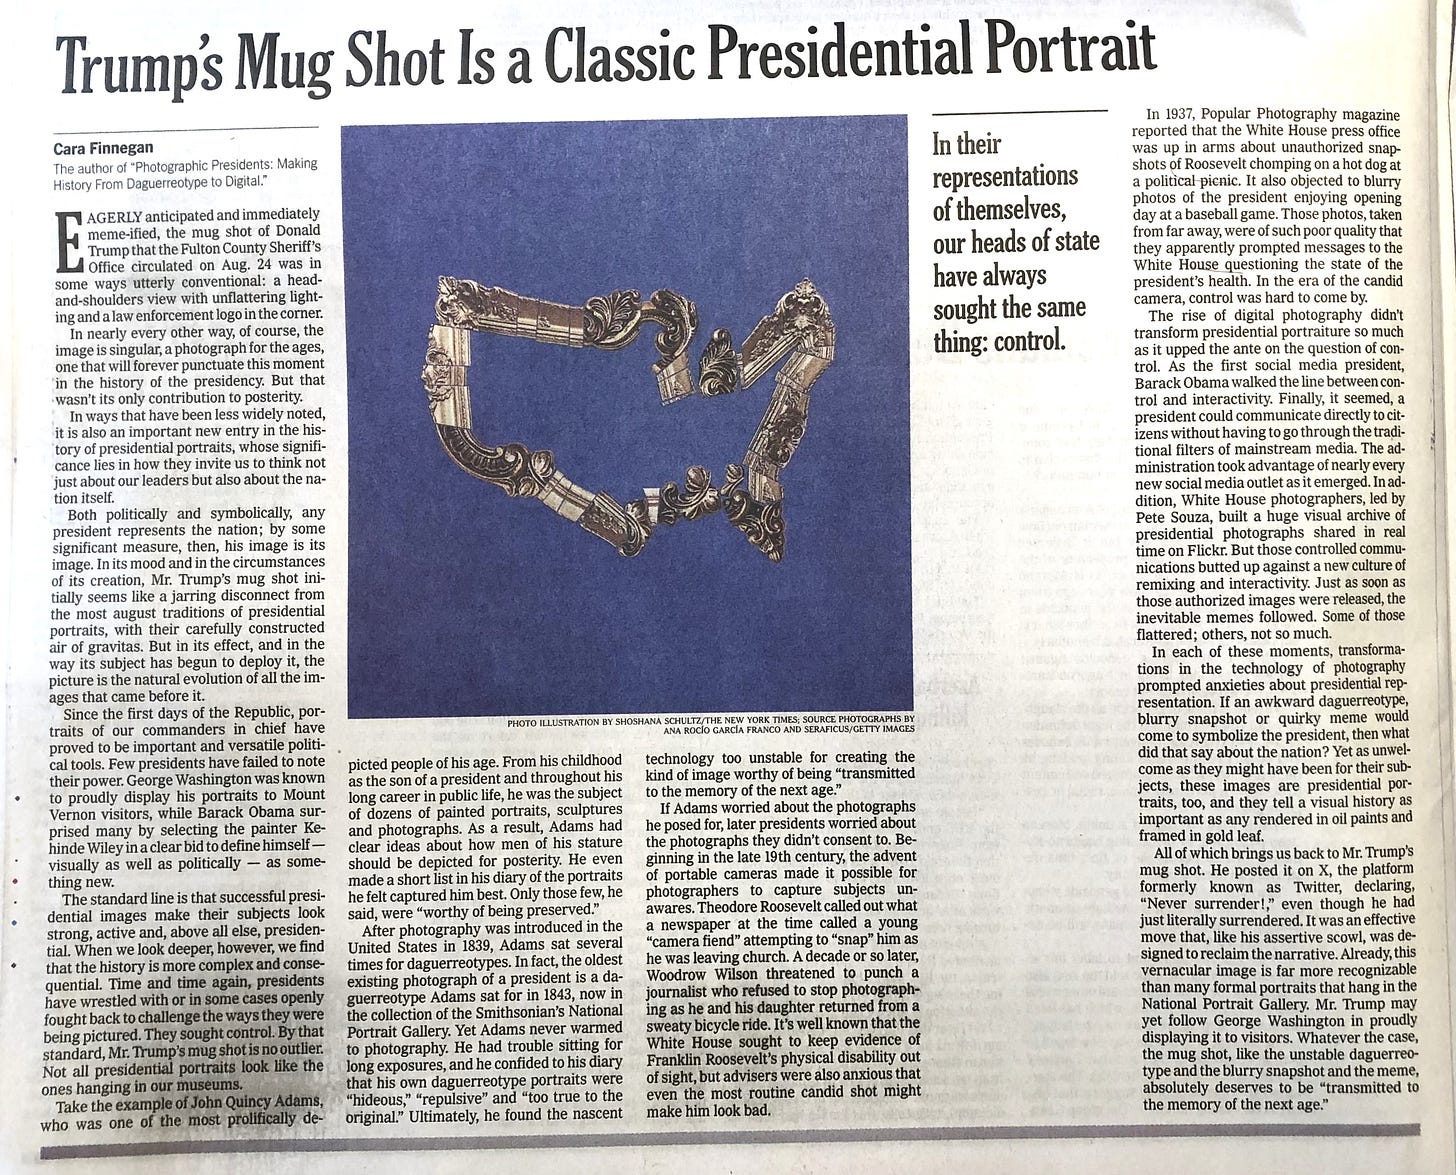 Photo of my op ed as it appeared in print in the New York Times, headline "Trump's Mug Shot is a classic presidential portrait"